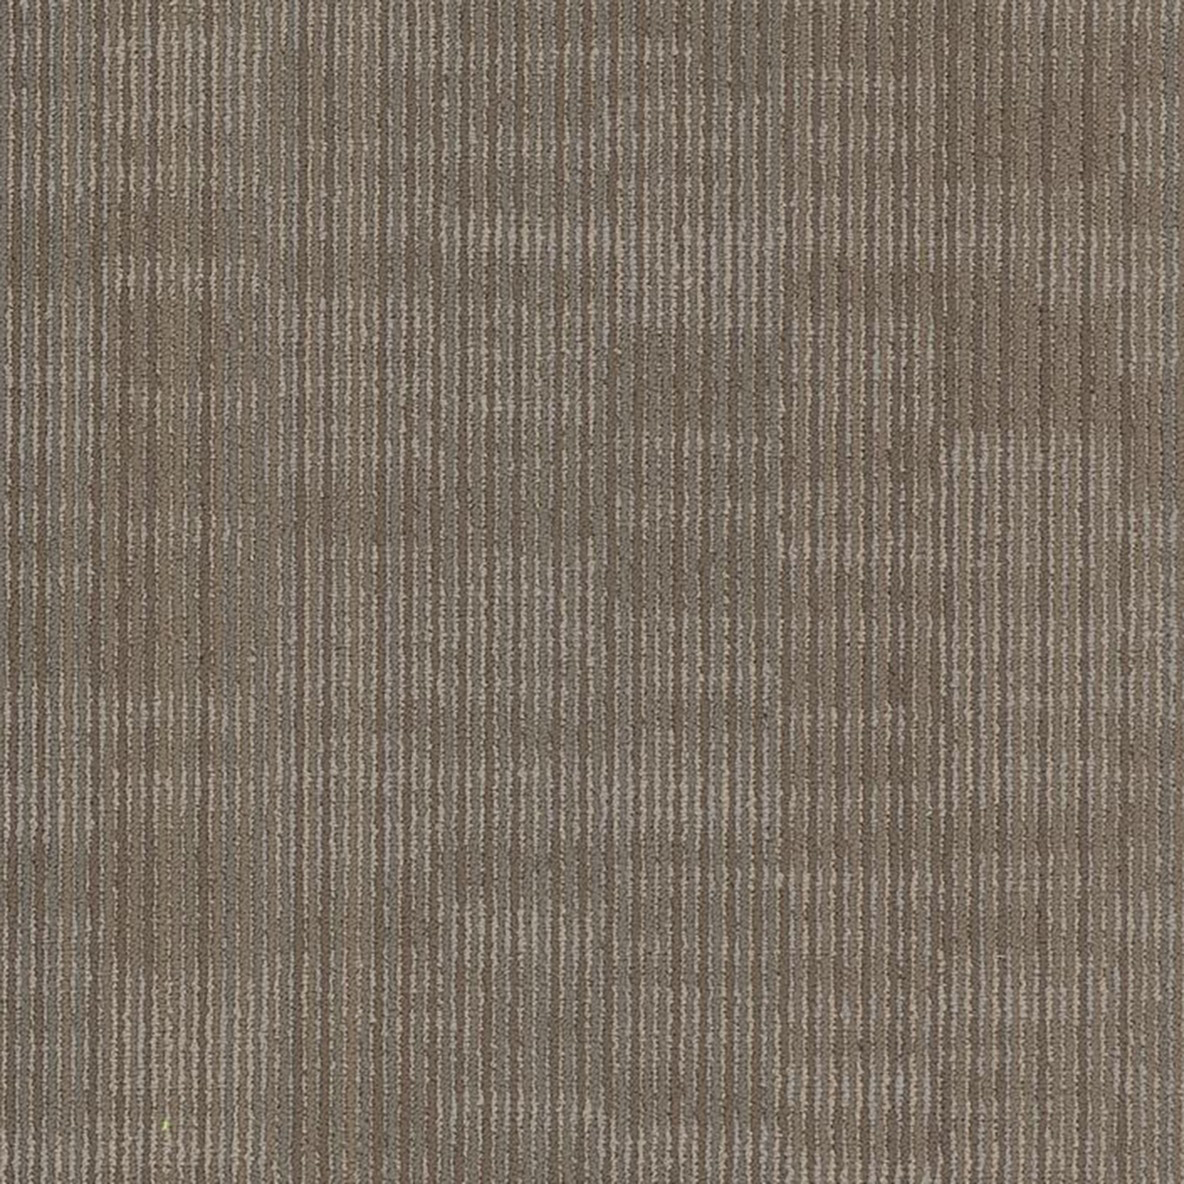 Trinity Commercial Carpet Plank .22 Inch x 1.5x3 Ft. 10 per Carton Cyber color close up